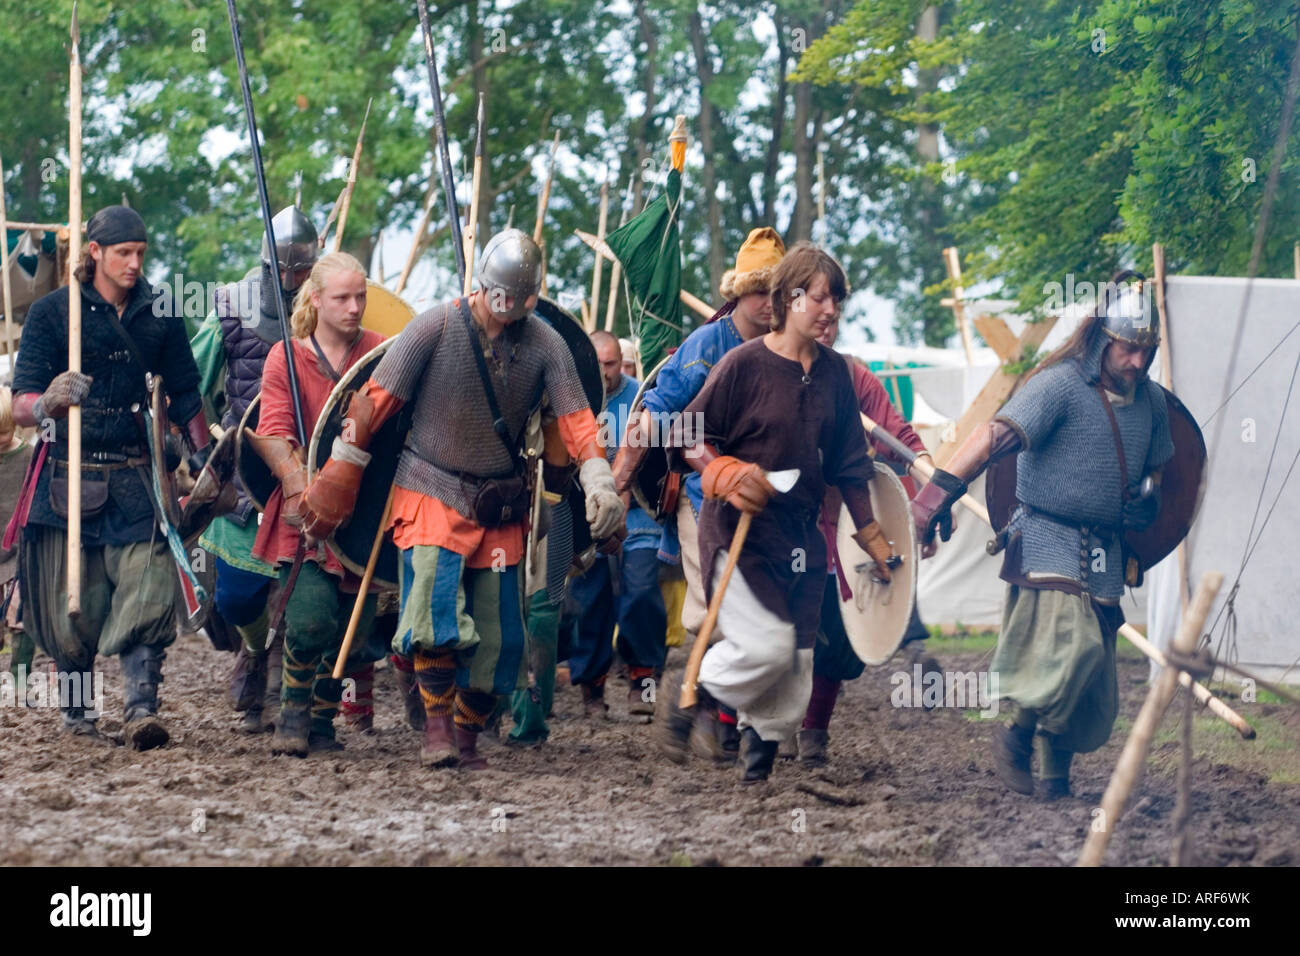 Viking warriors leaving camp for battle at a viking re-enactment festival Stock Photo